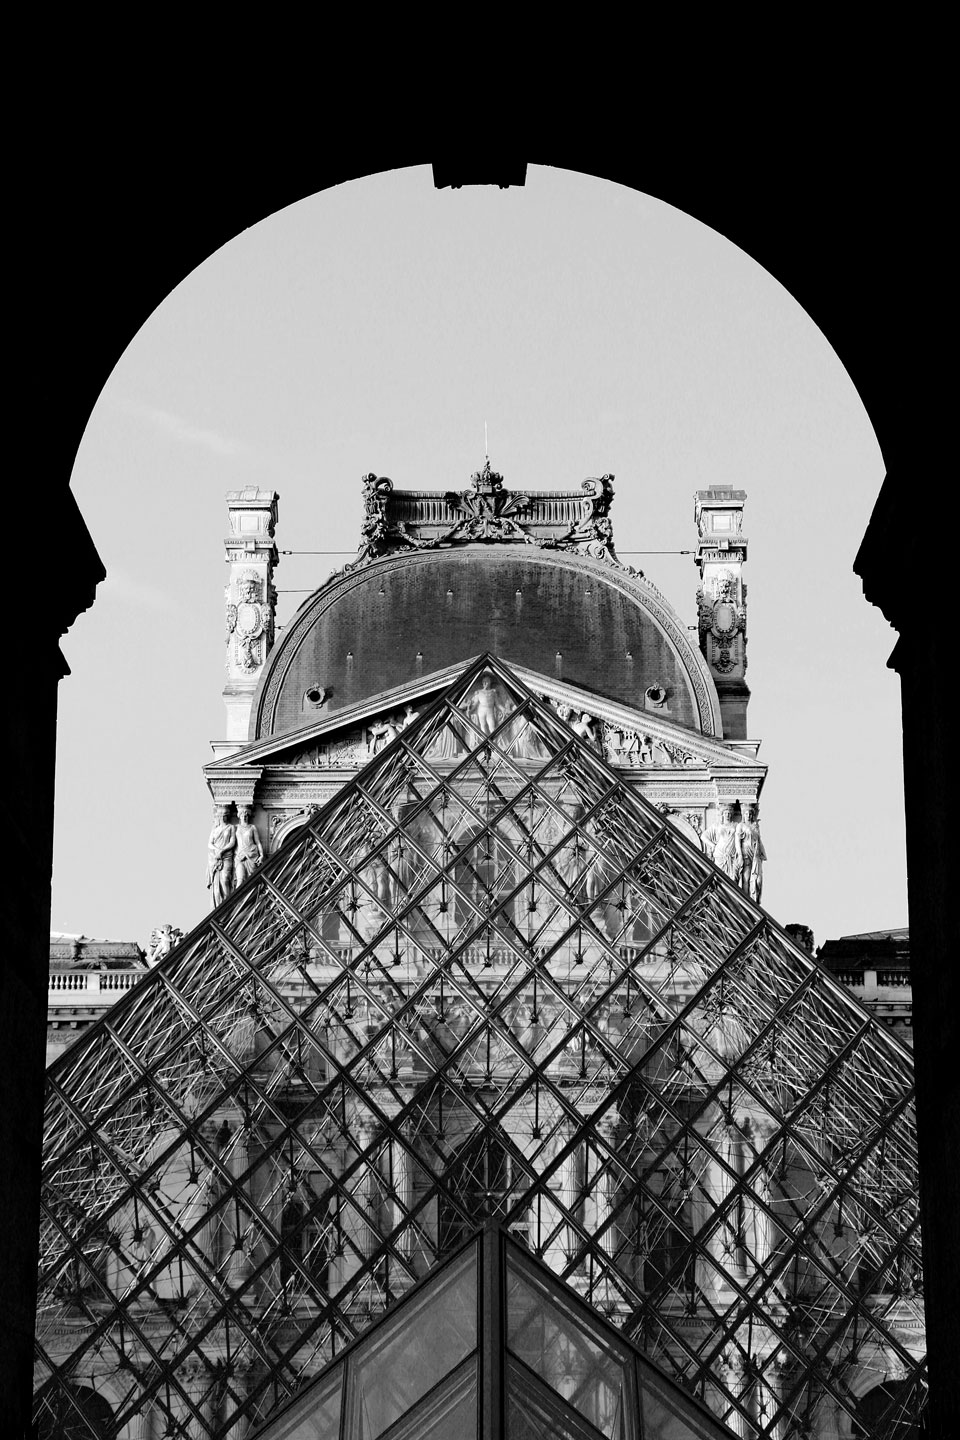 French Photographer Paris France Art Photography The Louvre museum and its pyramids